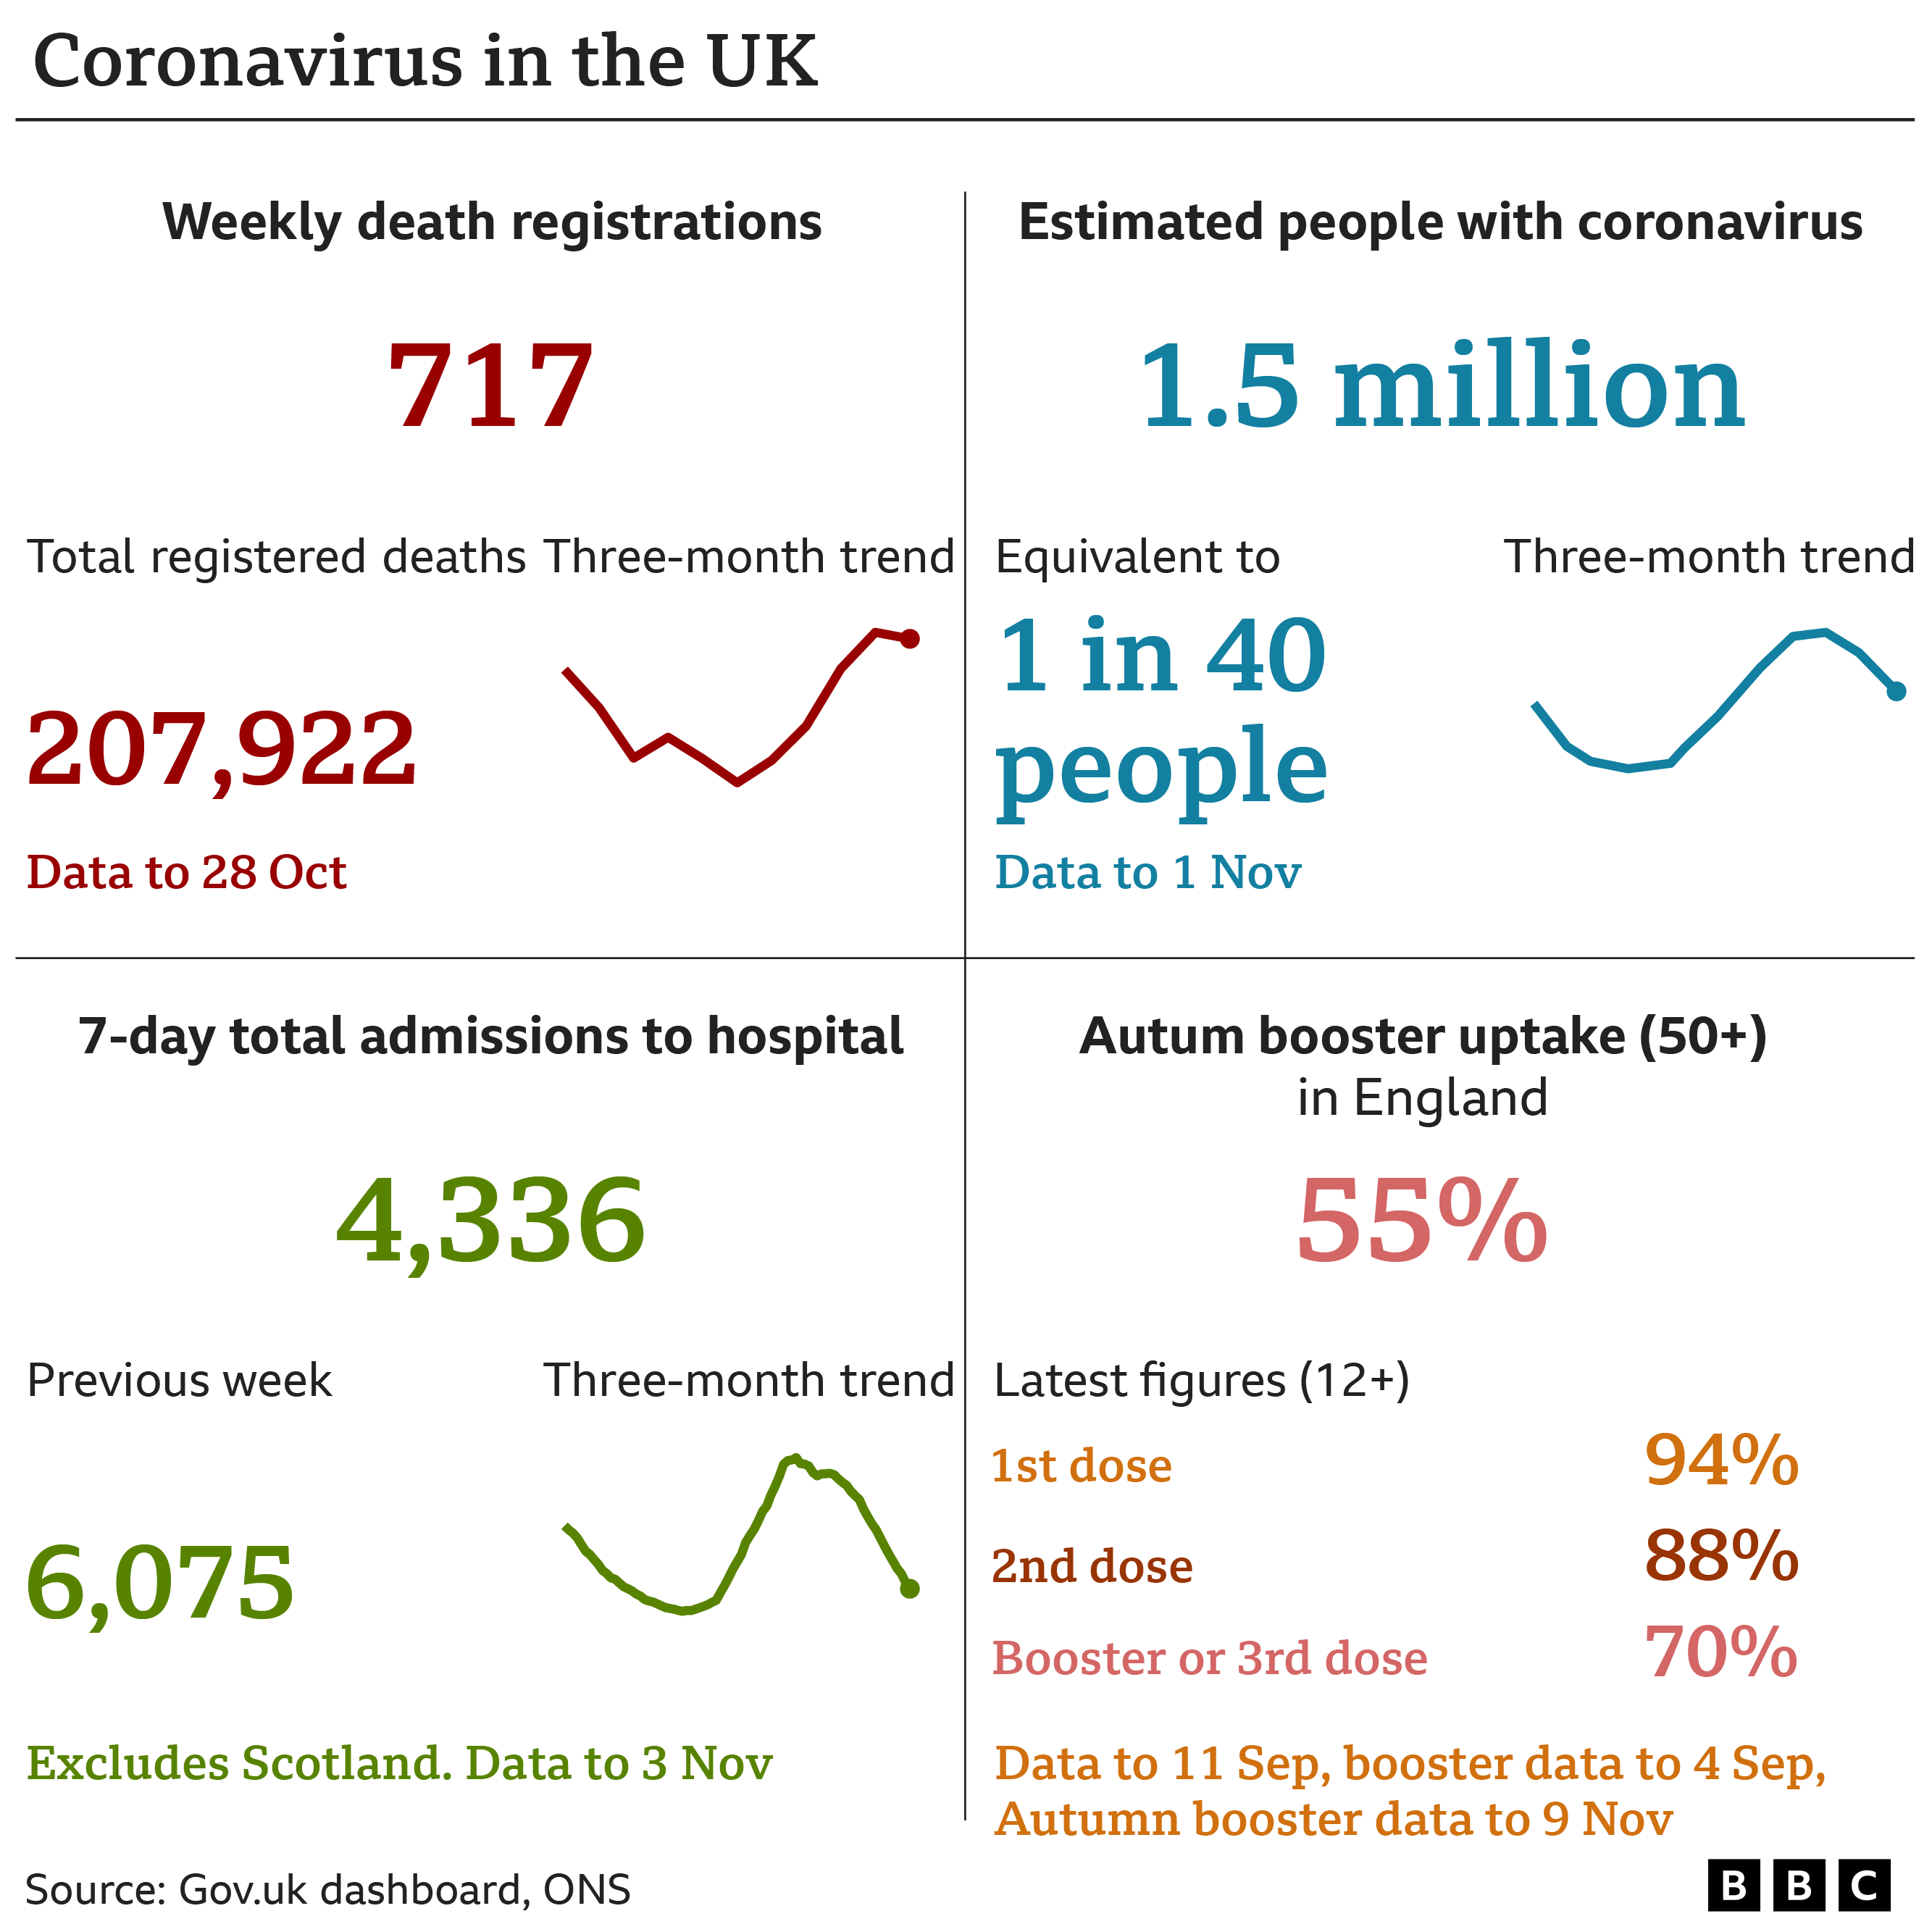 Graphic summarising data on coronavirus in the UK. Deaths registered in the data to 28 Oct was 717. Total registered deaths: 207.922. Estimated people with coronavirus data to 24 Oct: 1.5 million, equivalent to 1 in 40 people. Seven-day total admissions to hospital to 27 Oct: 4,336 compared to 6,075 in the previous week.. Latest daily vaccine figures. First dose: 94%. Second dose: 88%. Booster doses: 70%.